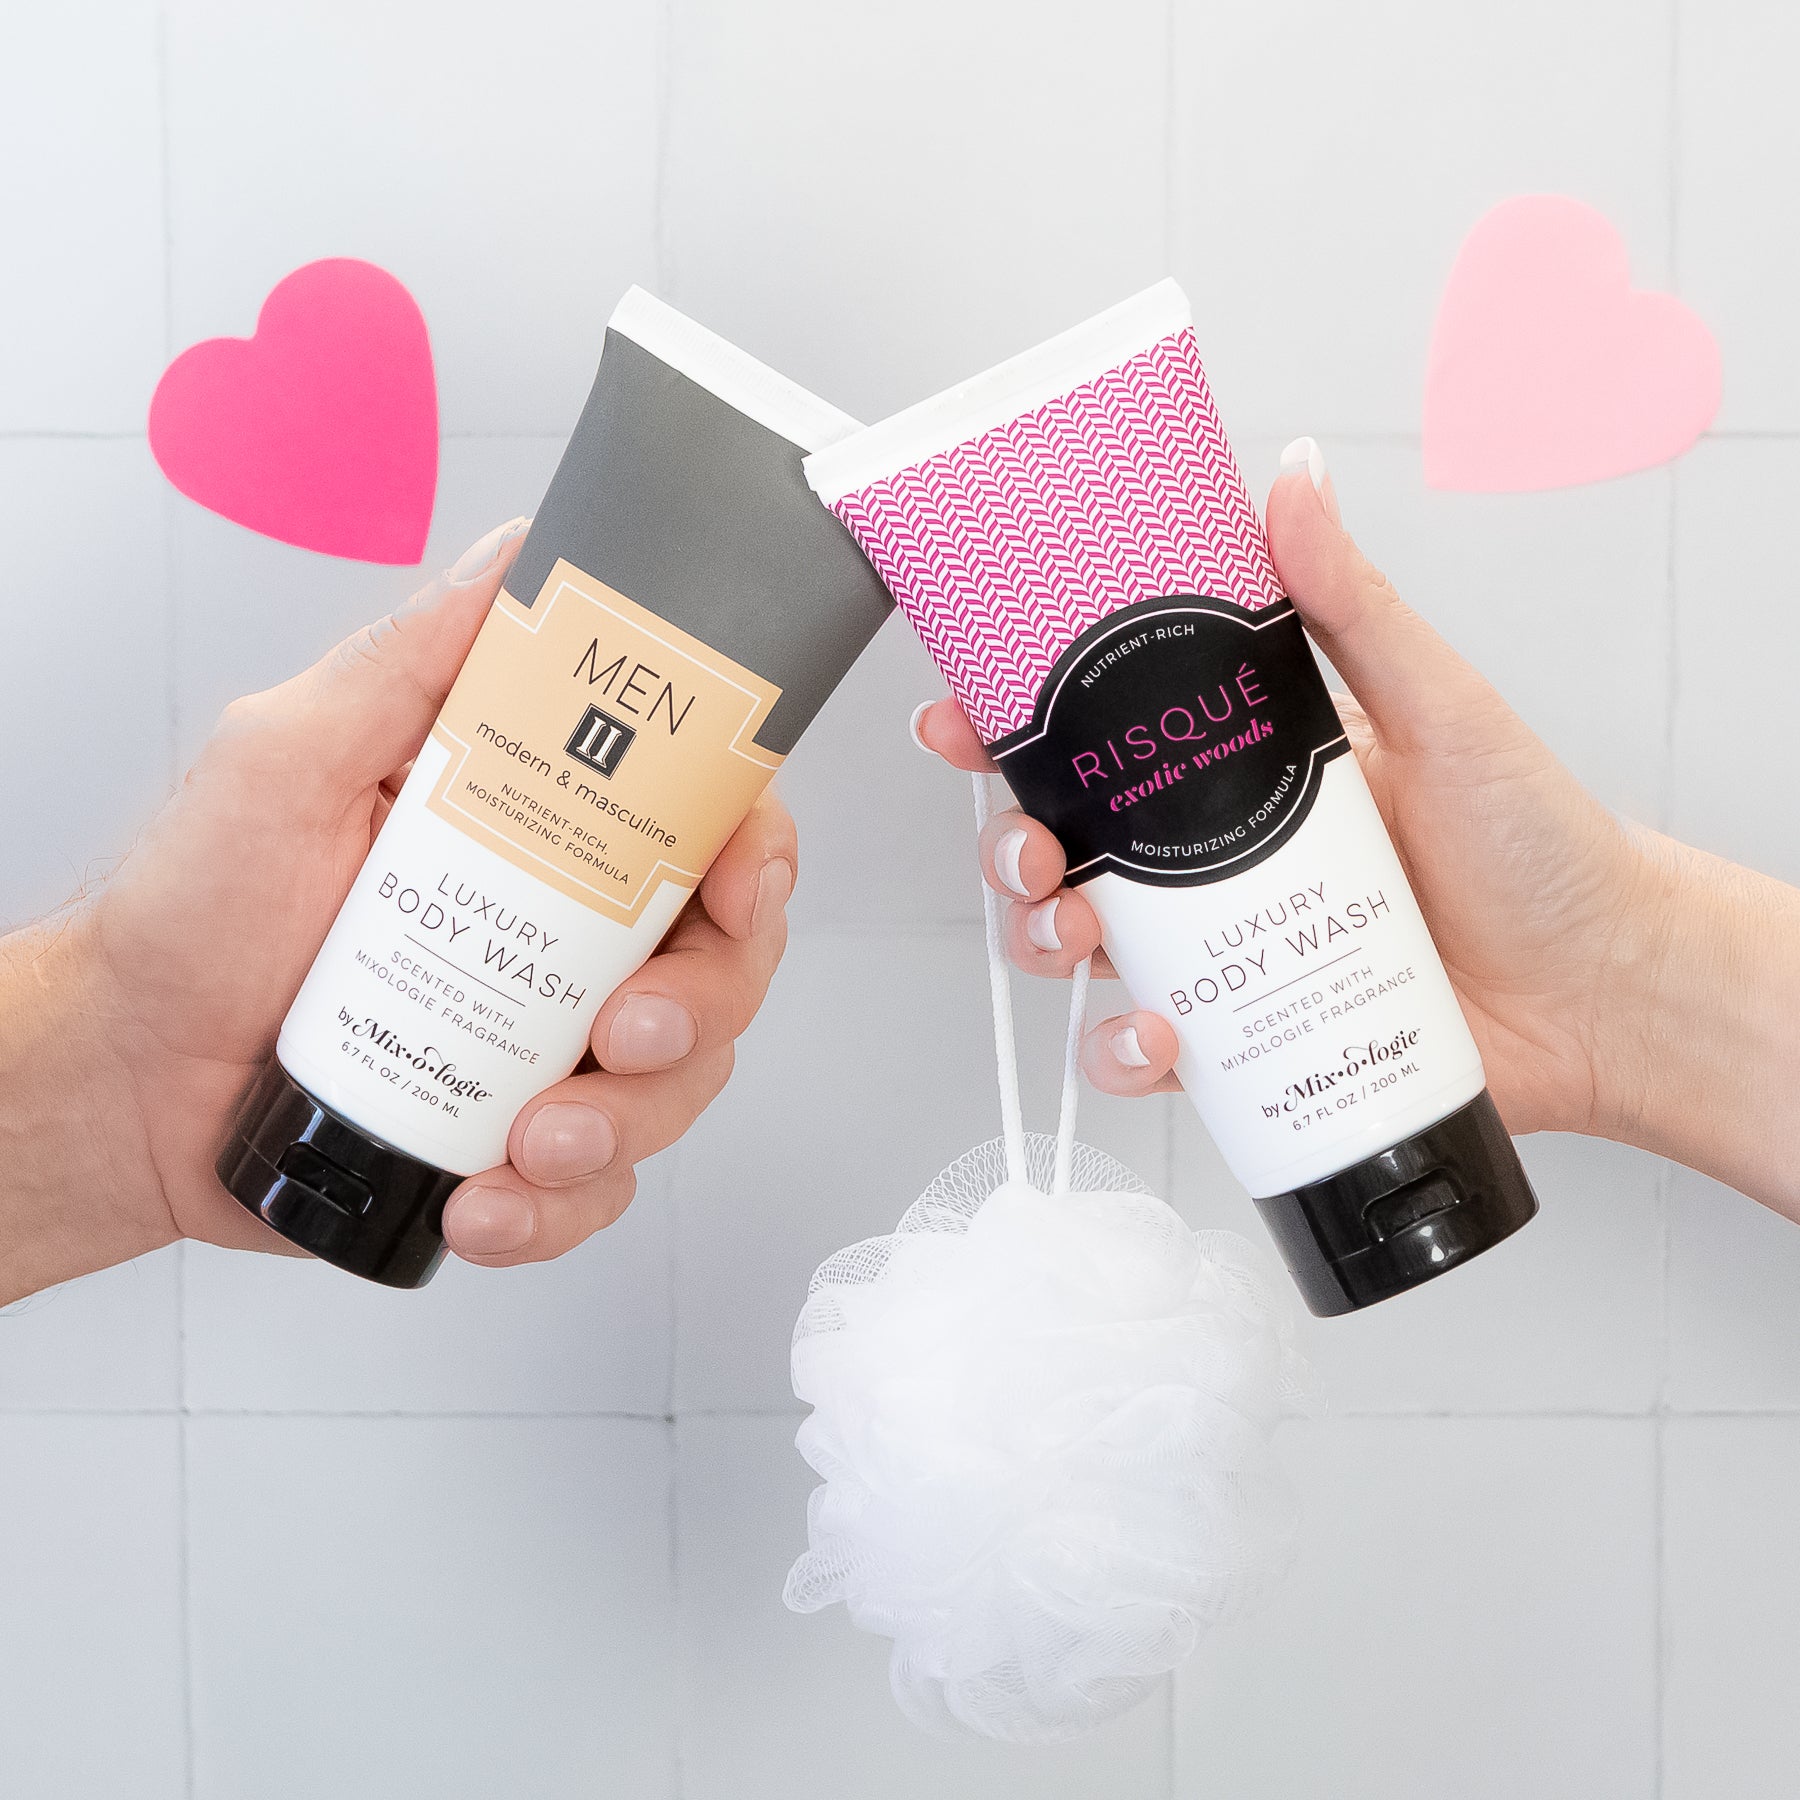 2 Body Wash tubes being held by hands in shower with hearts.  Scents of the body wash are Men's II and Risque (exotic woods)